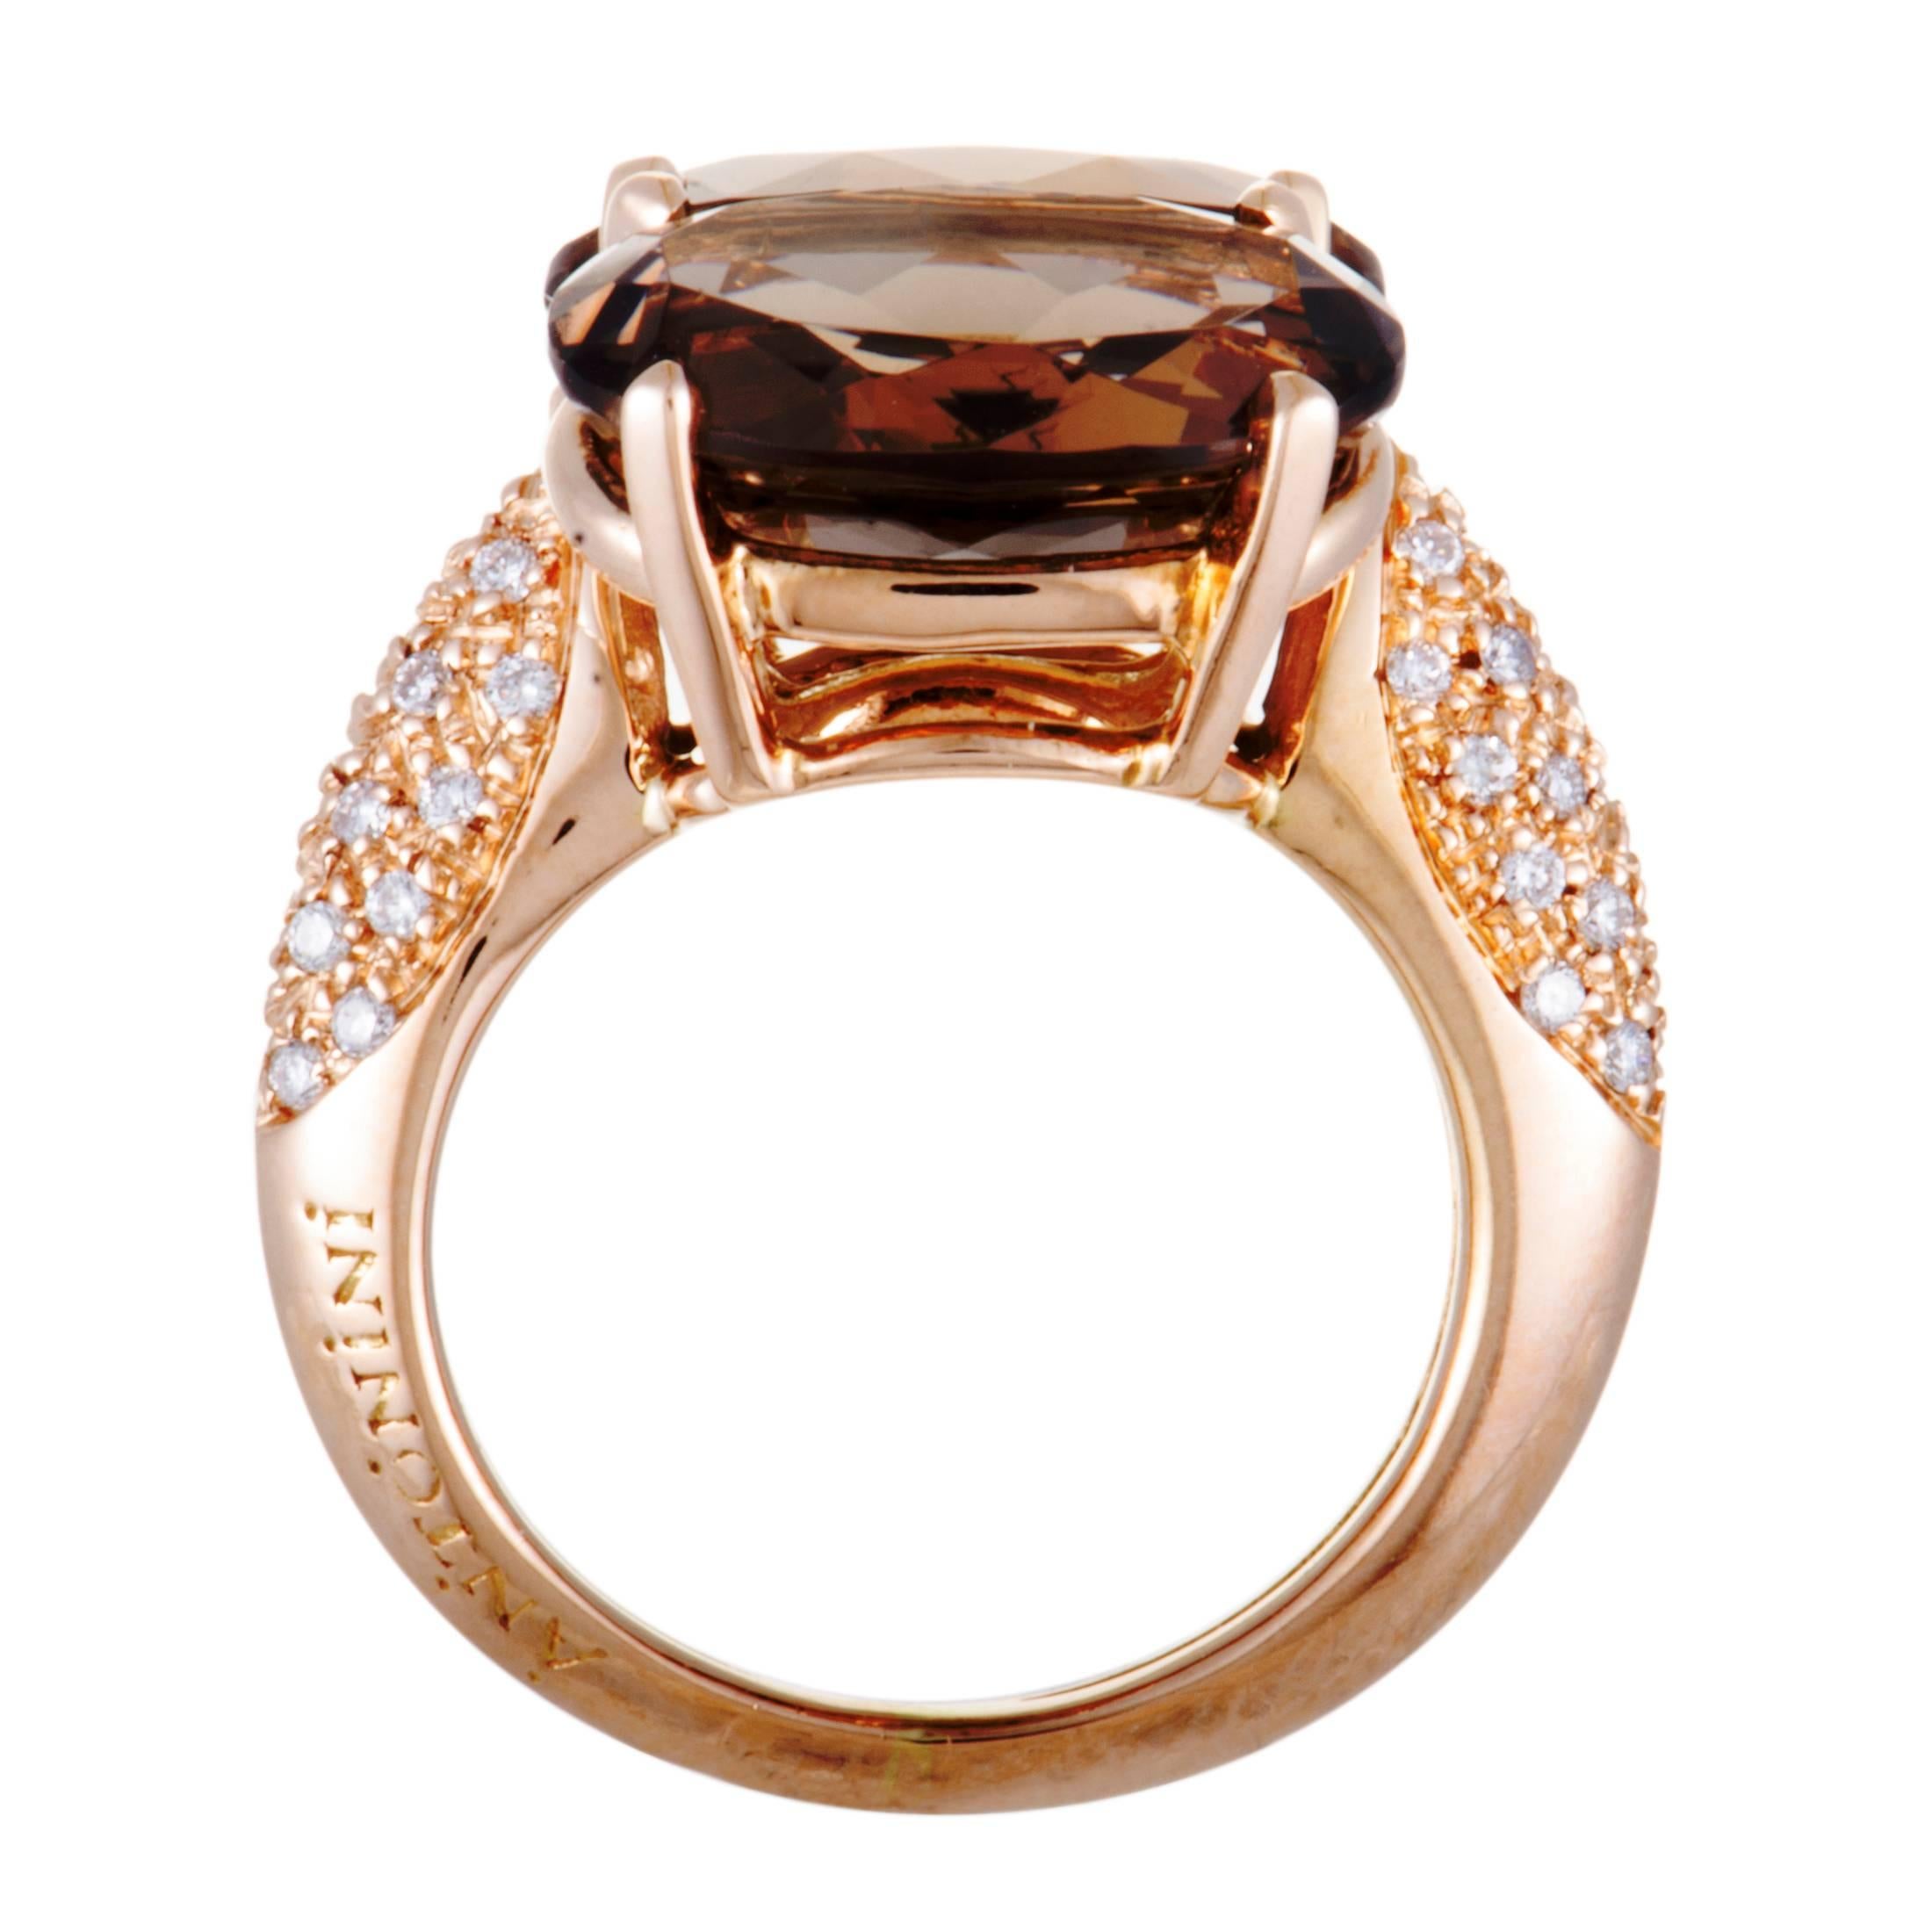 Created for the exceptional “Panama” collection that exudes refined elegance, this stunning Antonini ring will accentuate your look in the most charming manner. The ring is crafted from feminine 18K rose gold and decorated with 0.44 carats of